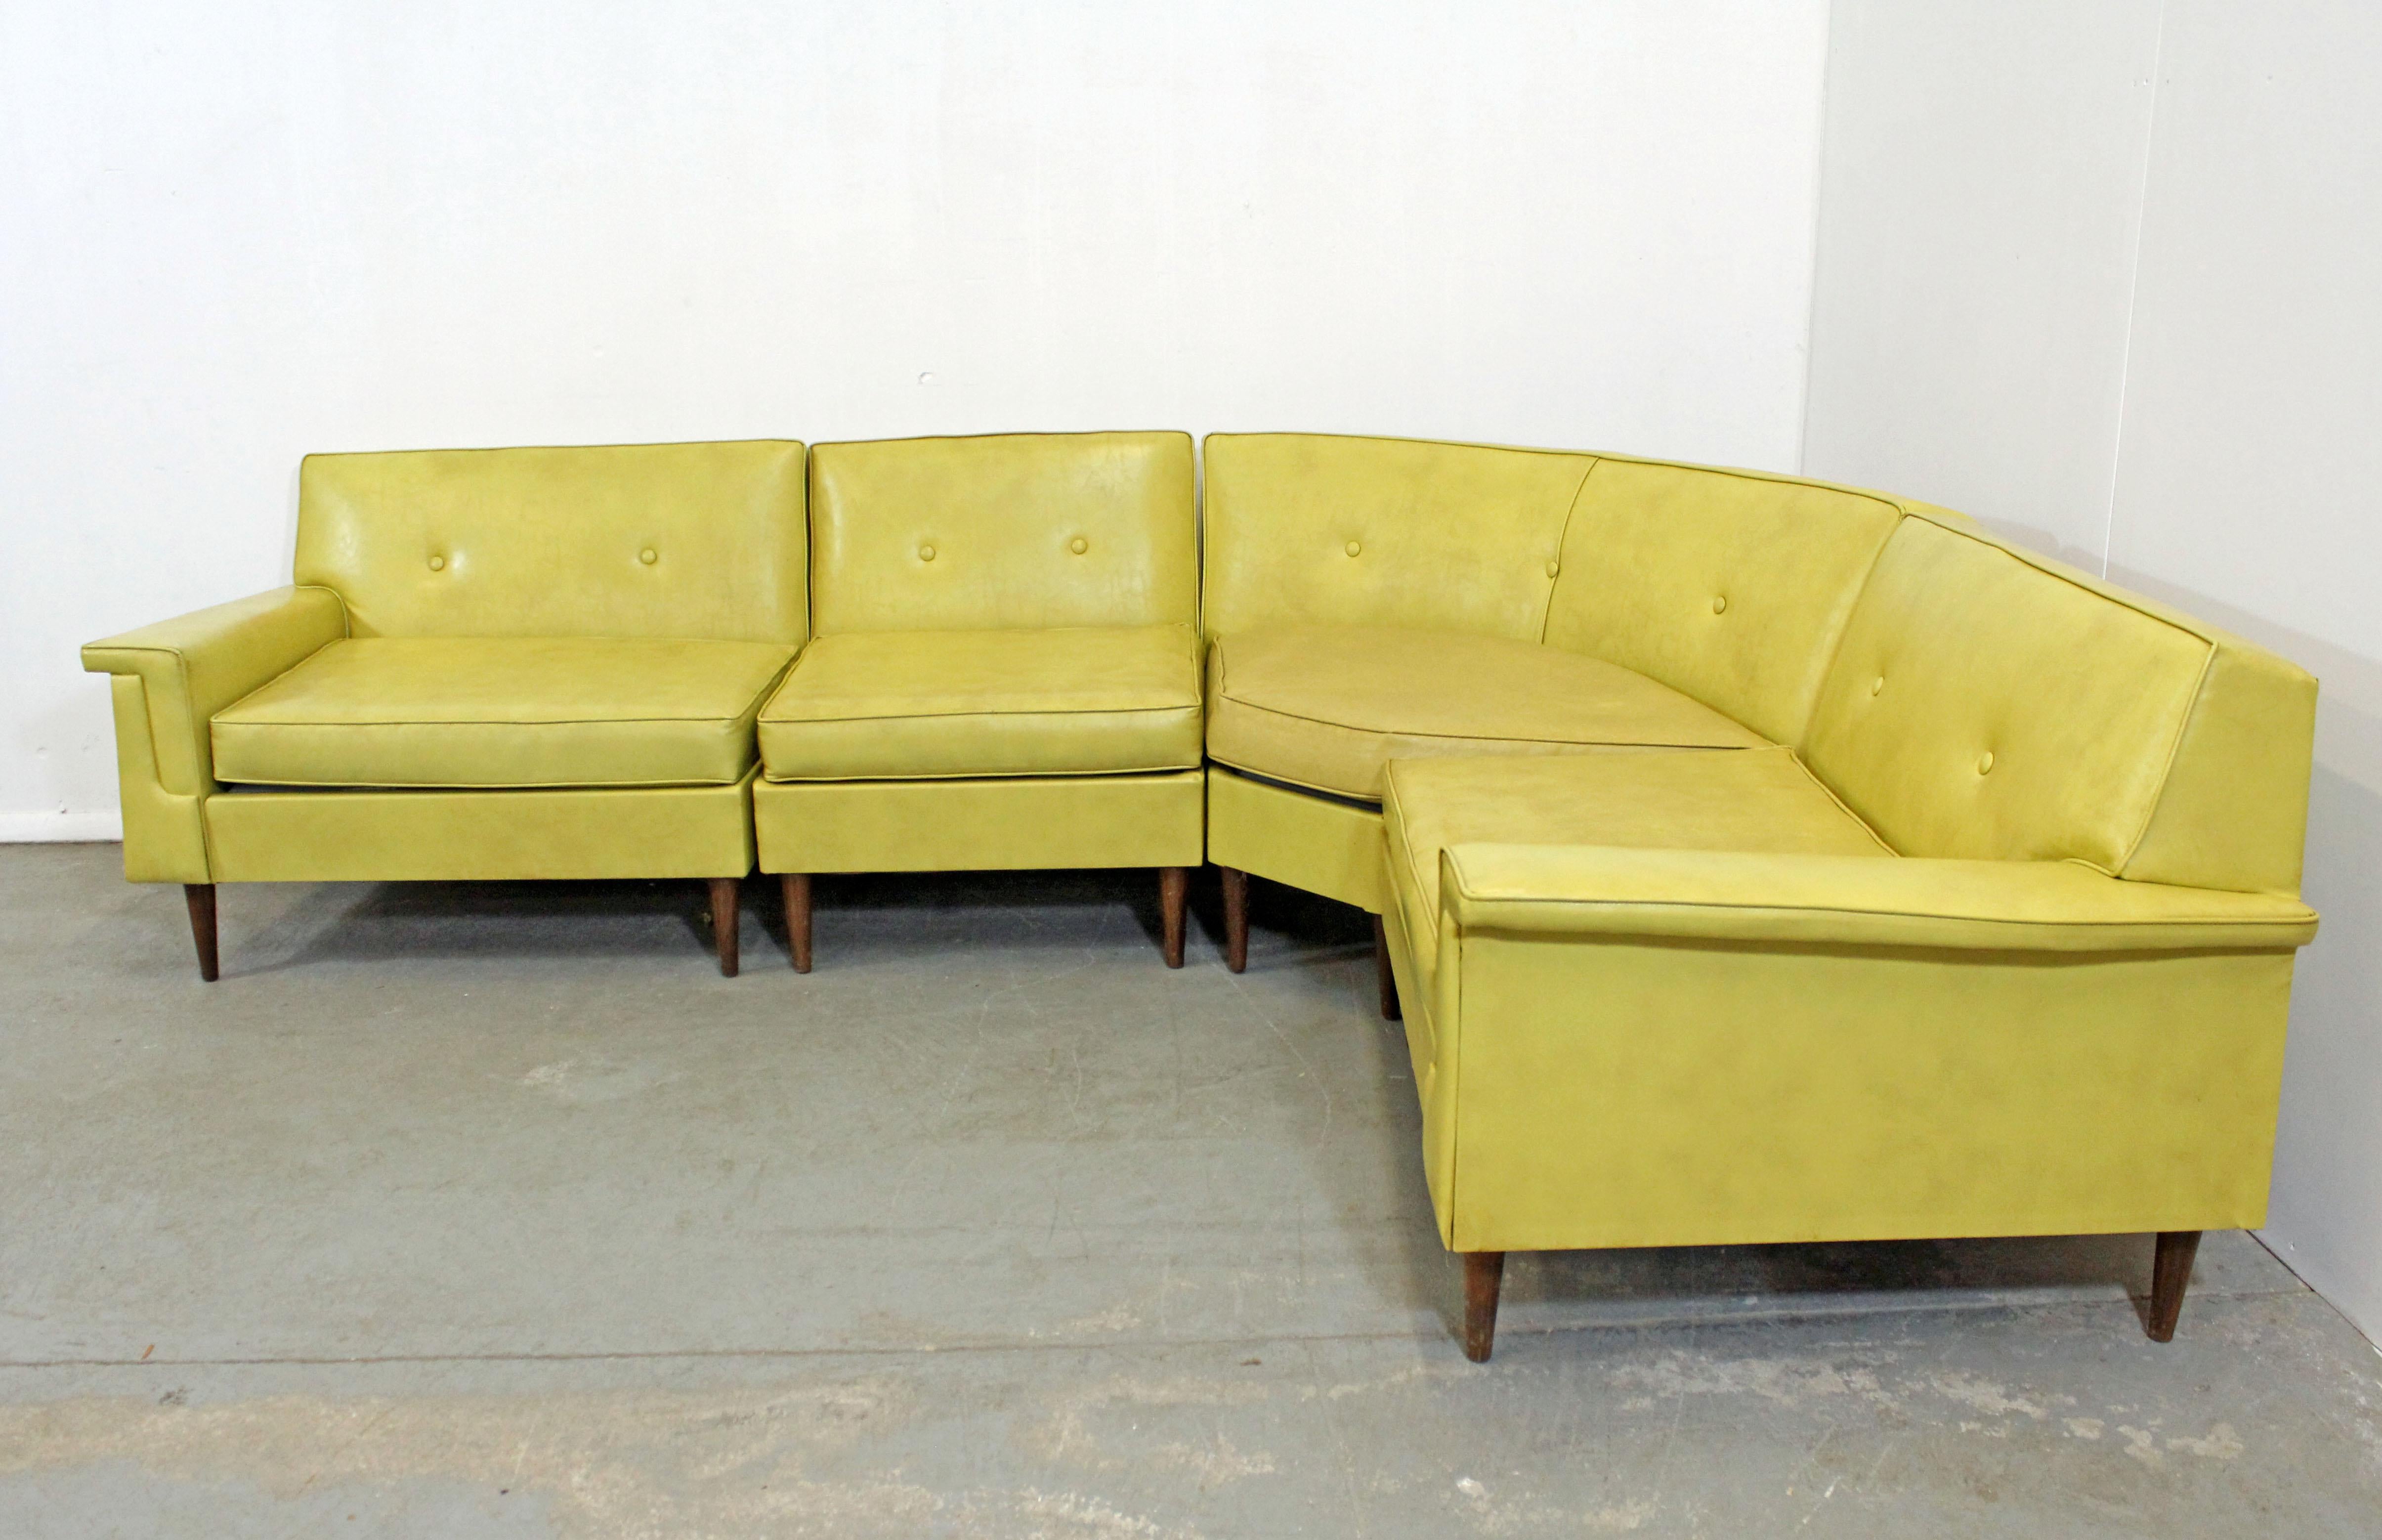 Offered is a Mid-Century Modern four-piece sectional sofa by Kroehler. This sofa has a super cool retro, modular style with vinyl upholstery. It is in structurally sound condition, but needs to be reupholstered. The vinyl upholstery has stains and